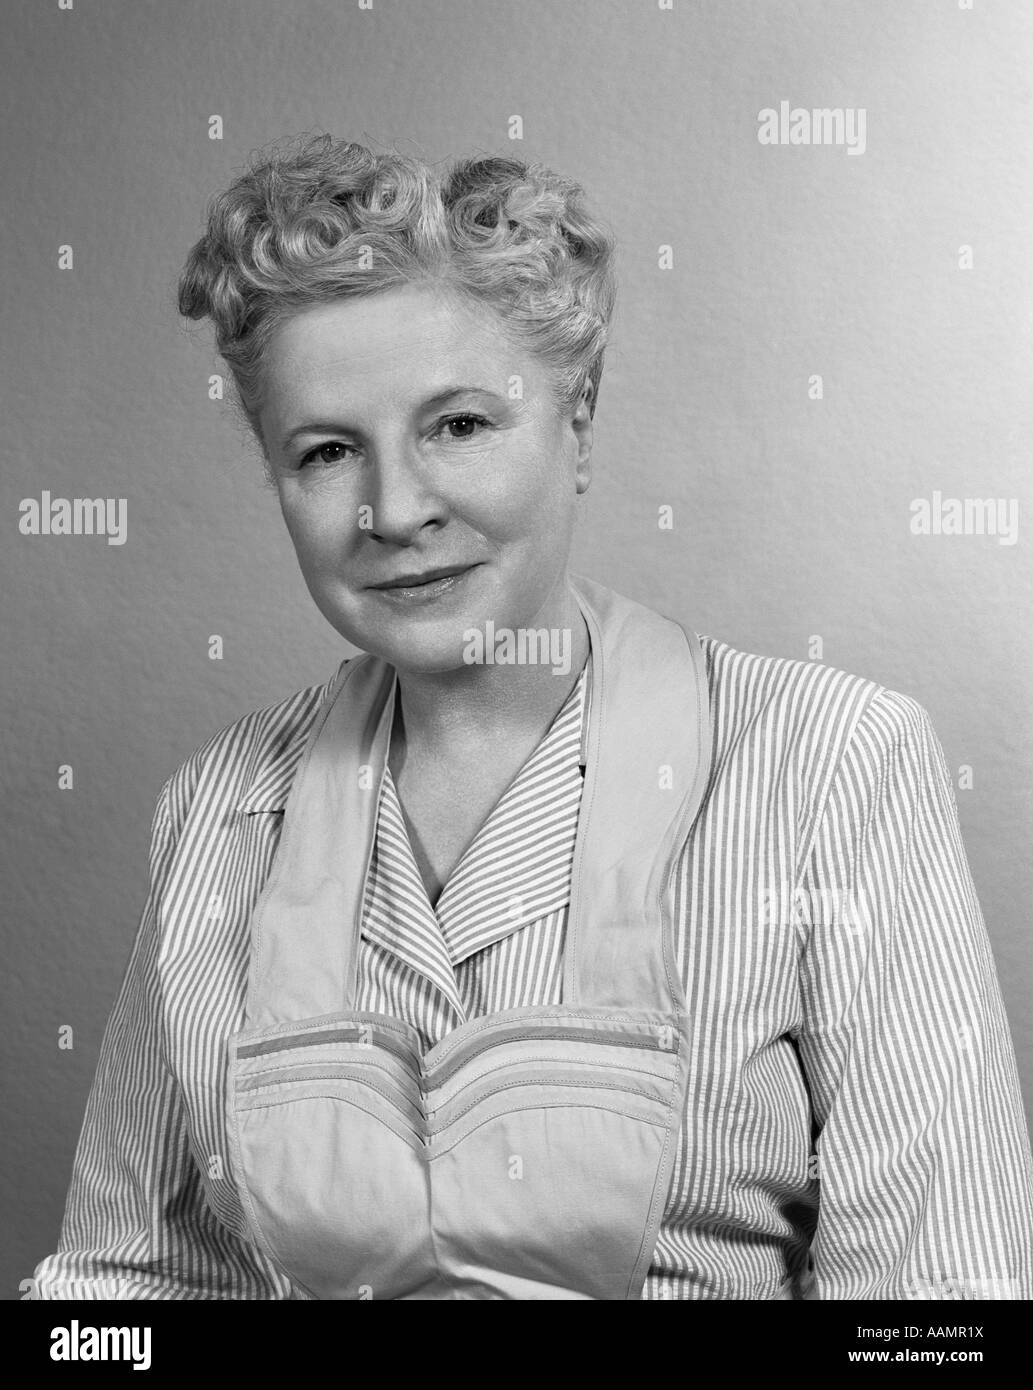 1950s PORTRAIT OF MATURE WOMAN MOTHER GRANDMOTHER WEARING APRON PINSTRIPE BLOUSE Stock Photo